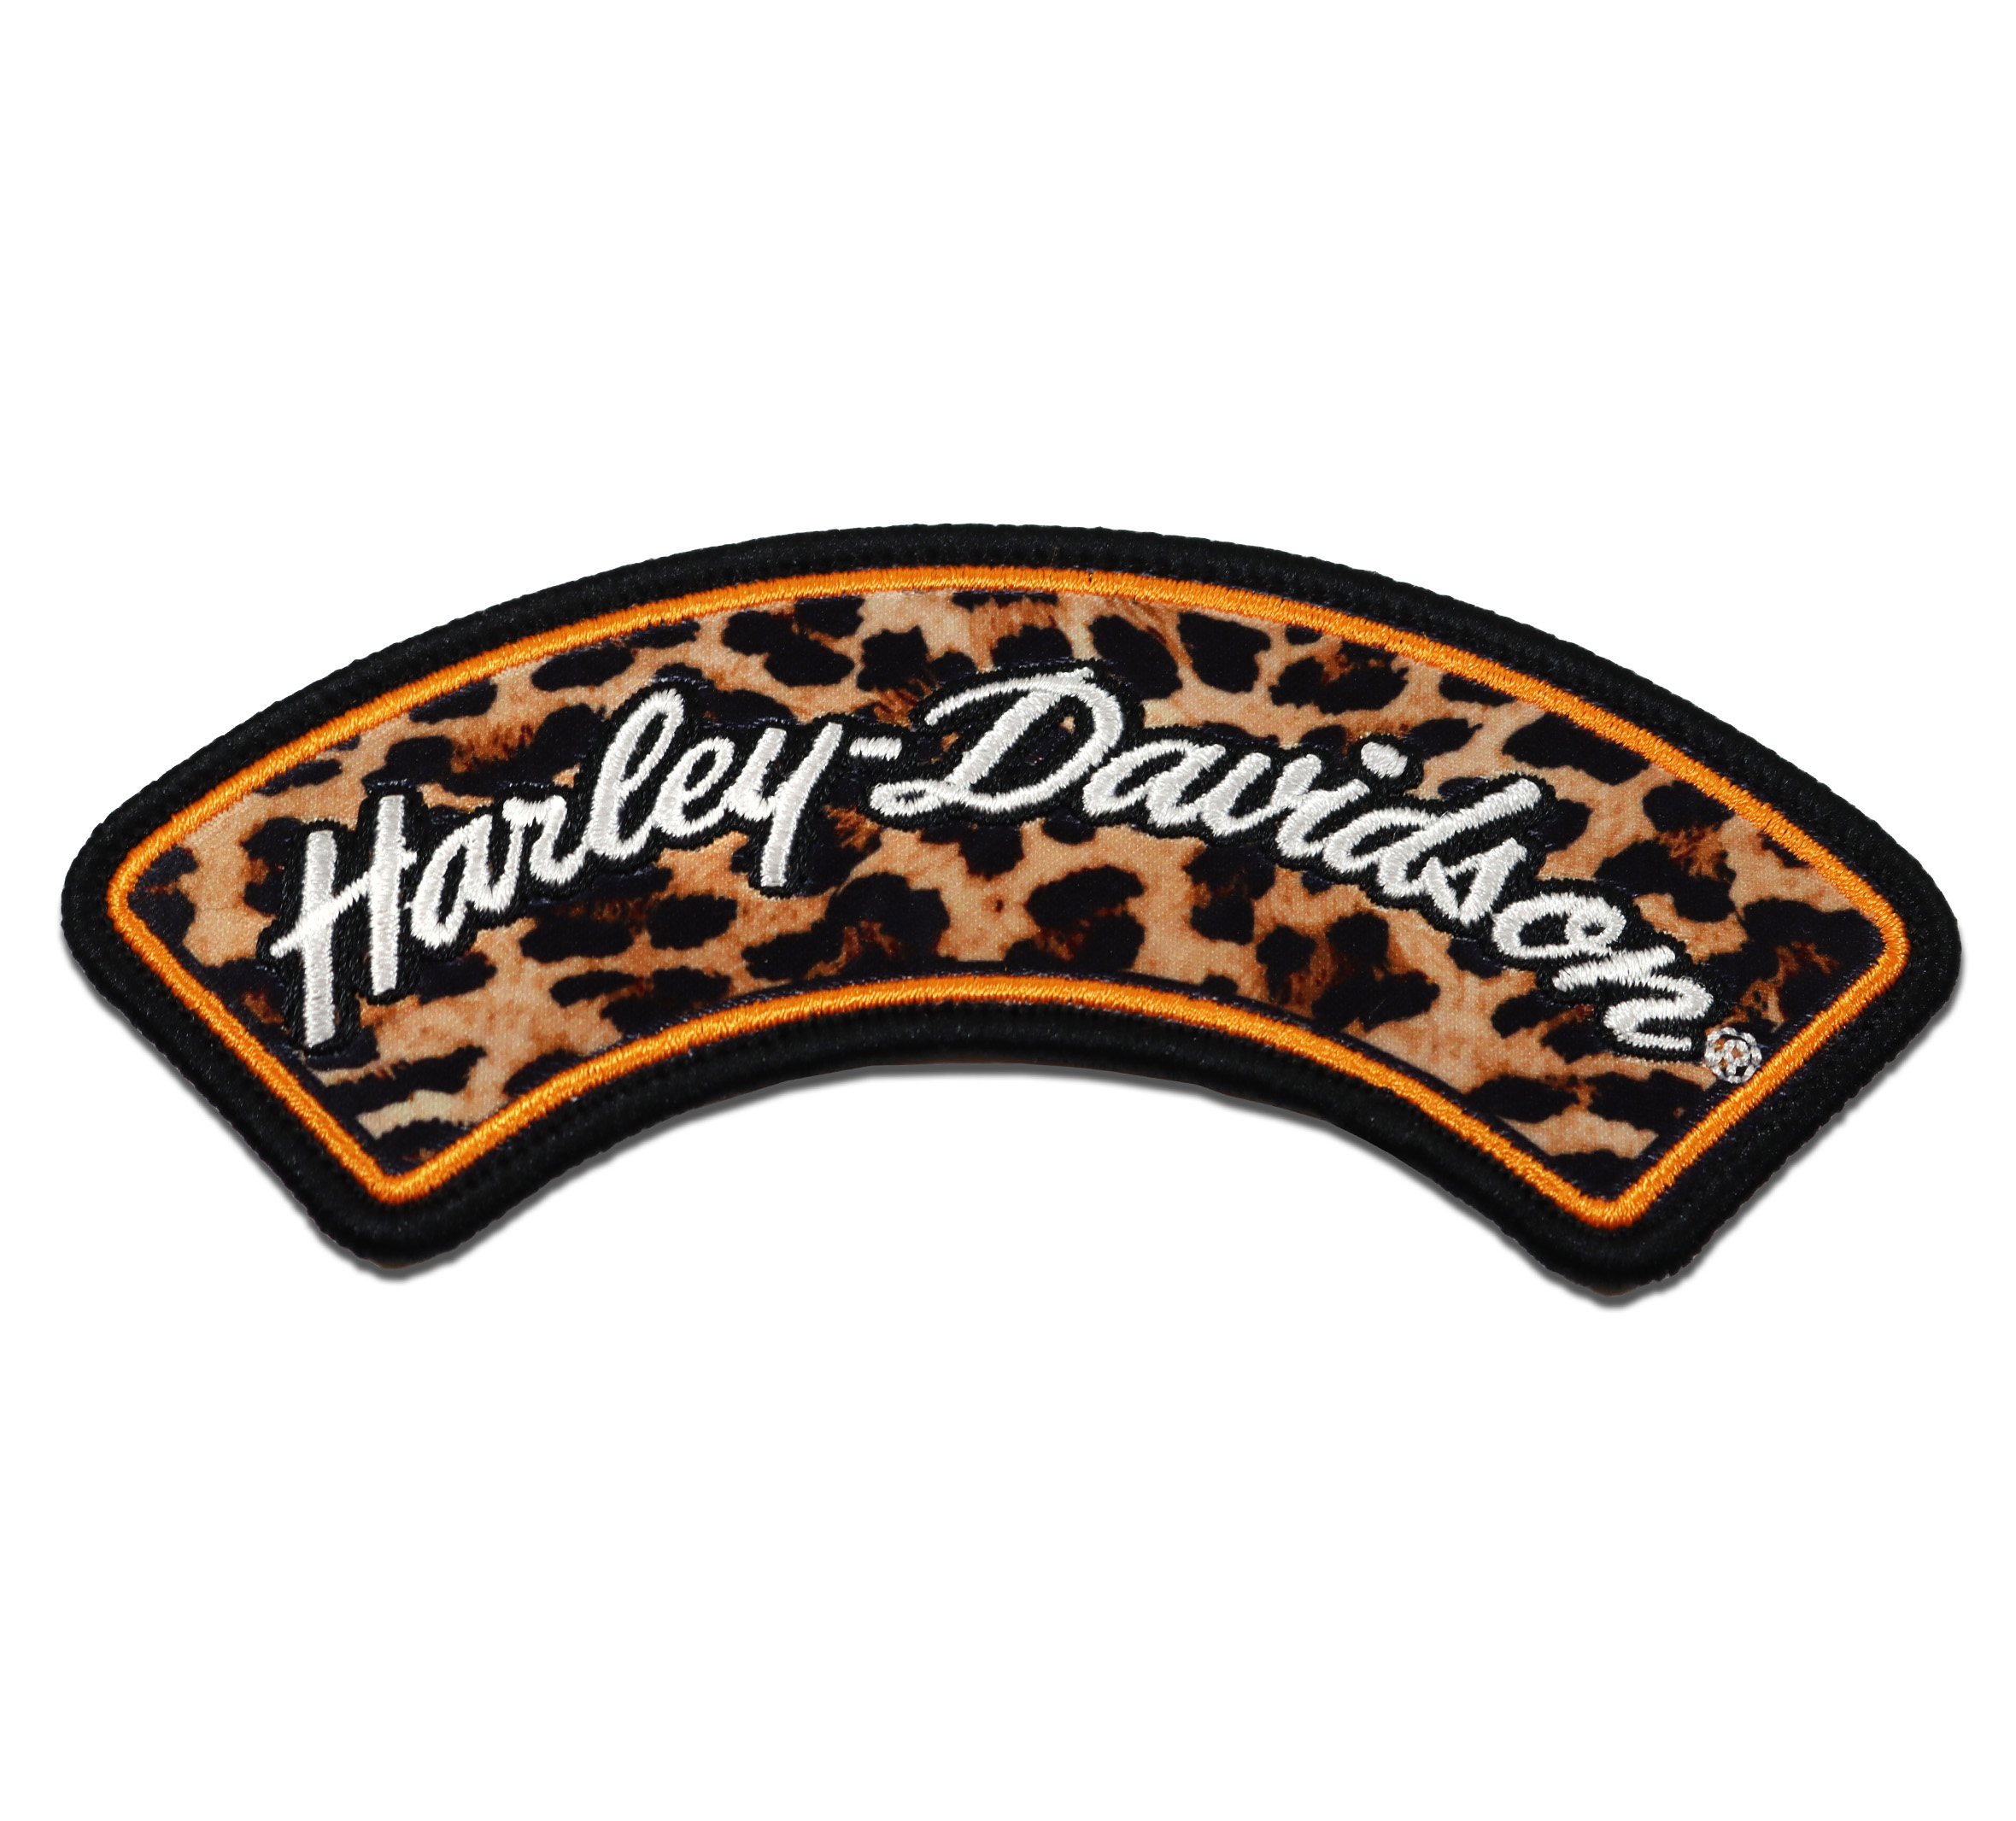 Harley Davidson Iron Wings Embroidered Patch -EM258396 / HD1